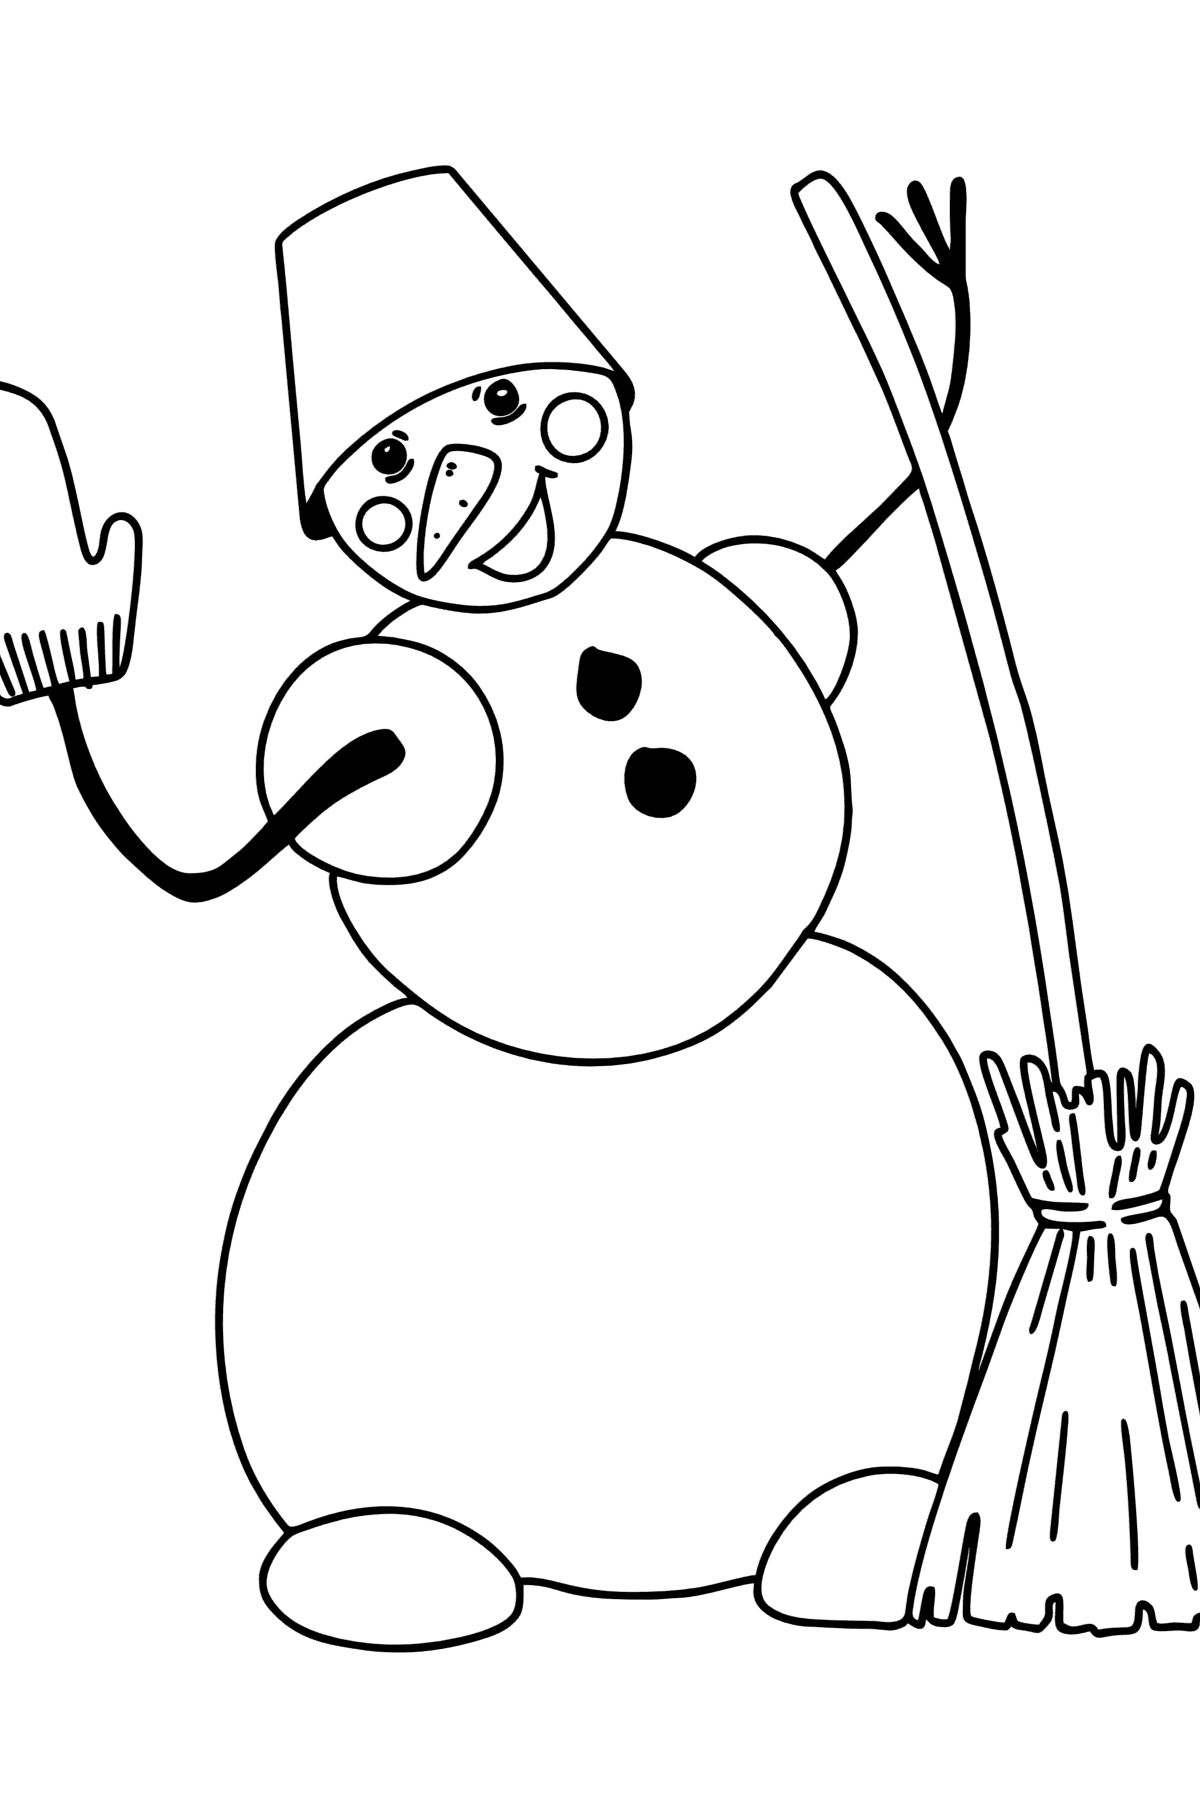 Snowman with Broom coloring page - Coloring Pages for Kids